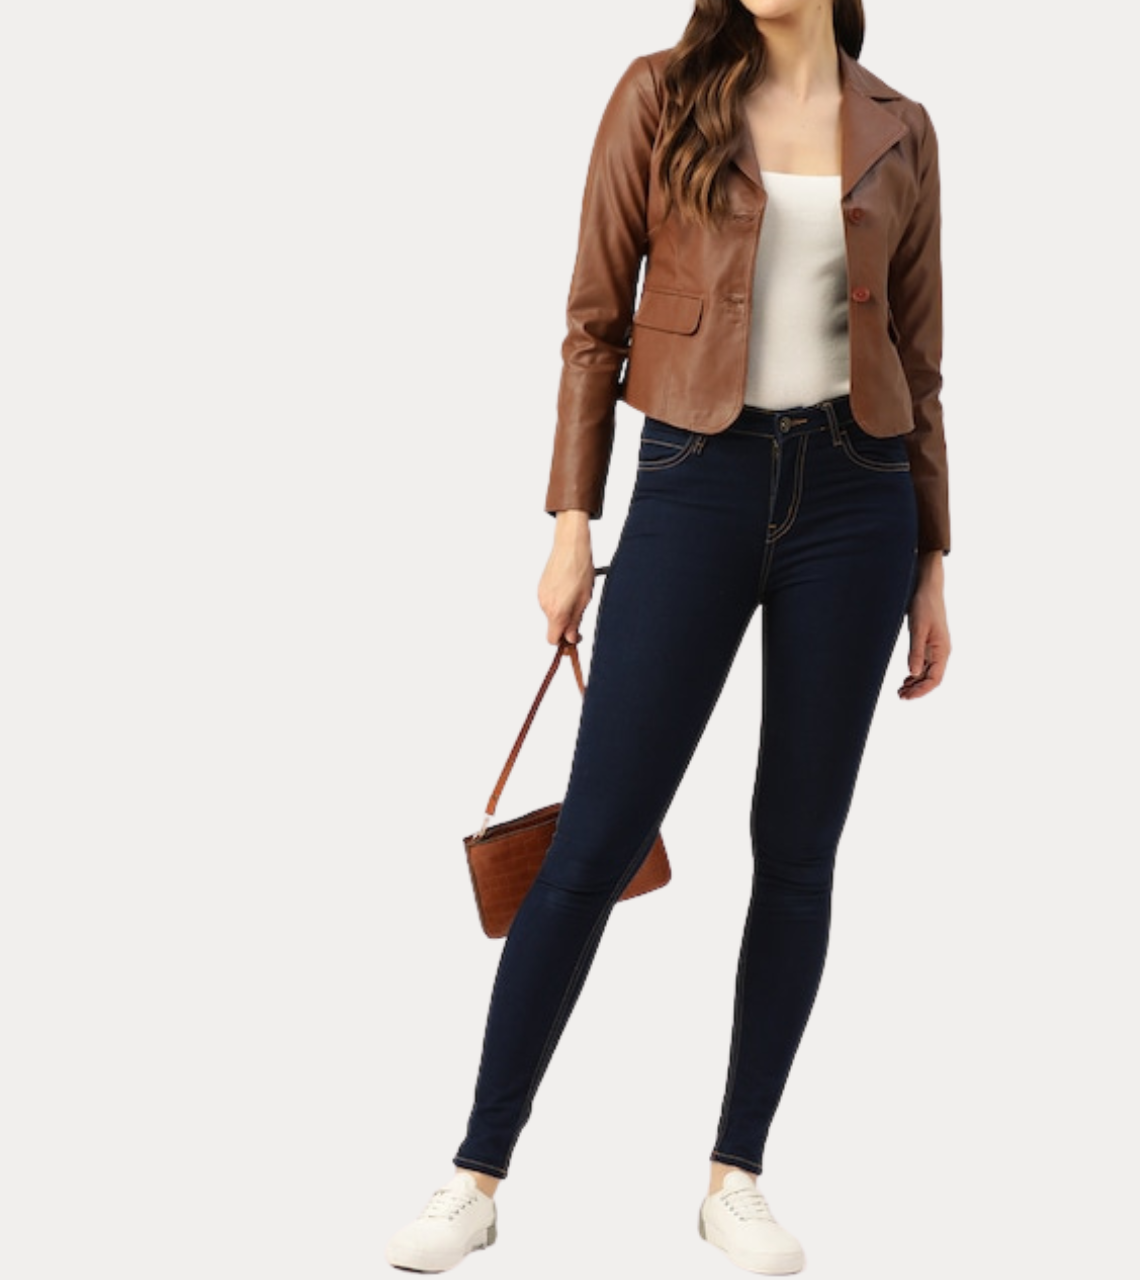 Sophisticated Brown Women's Leather Jacket